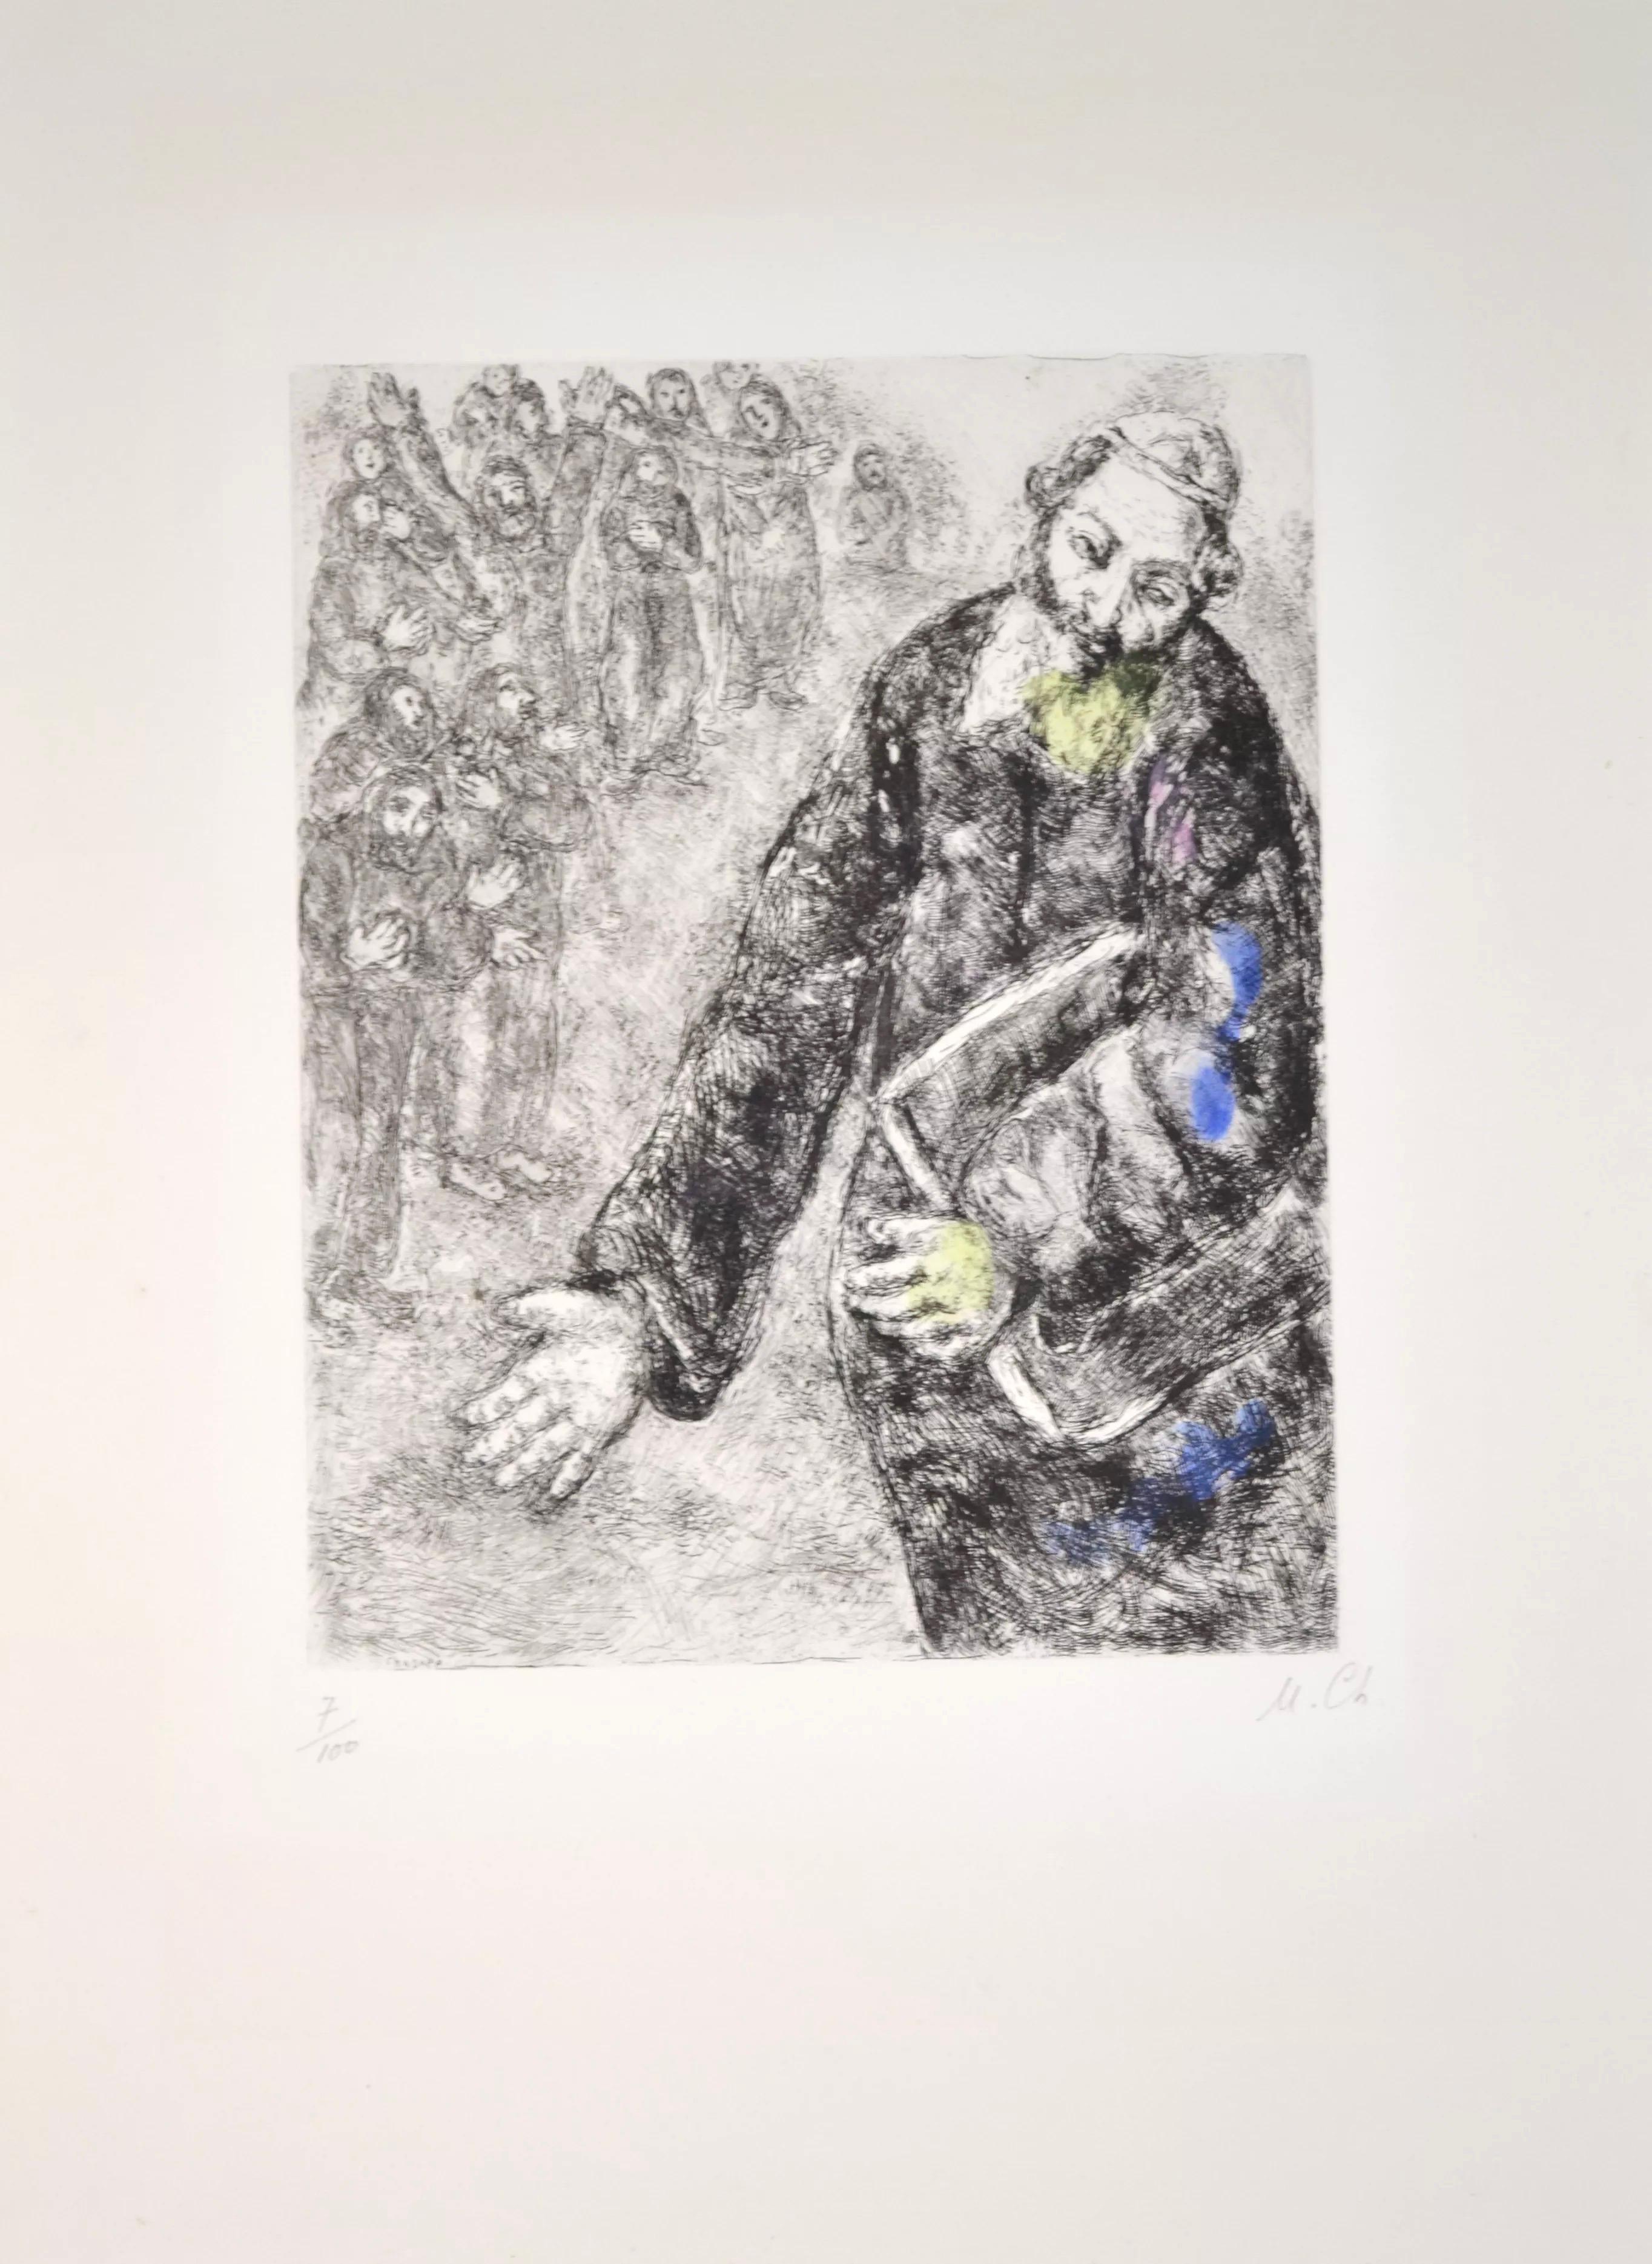 Joshua reading The Word Of The Law - MCH47 - Print by Marc Chagall